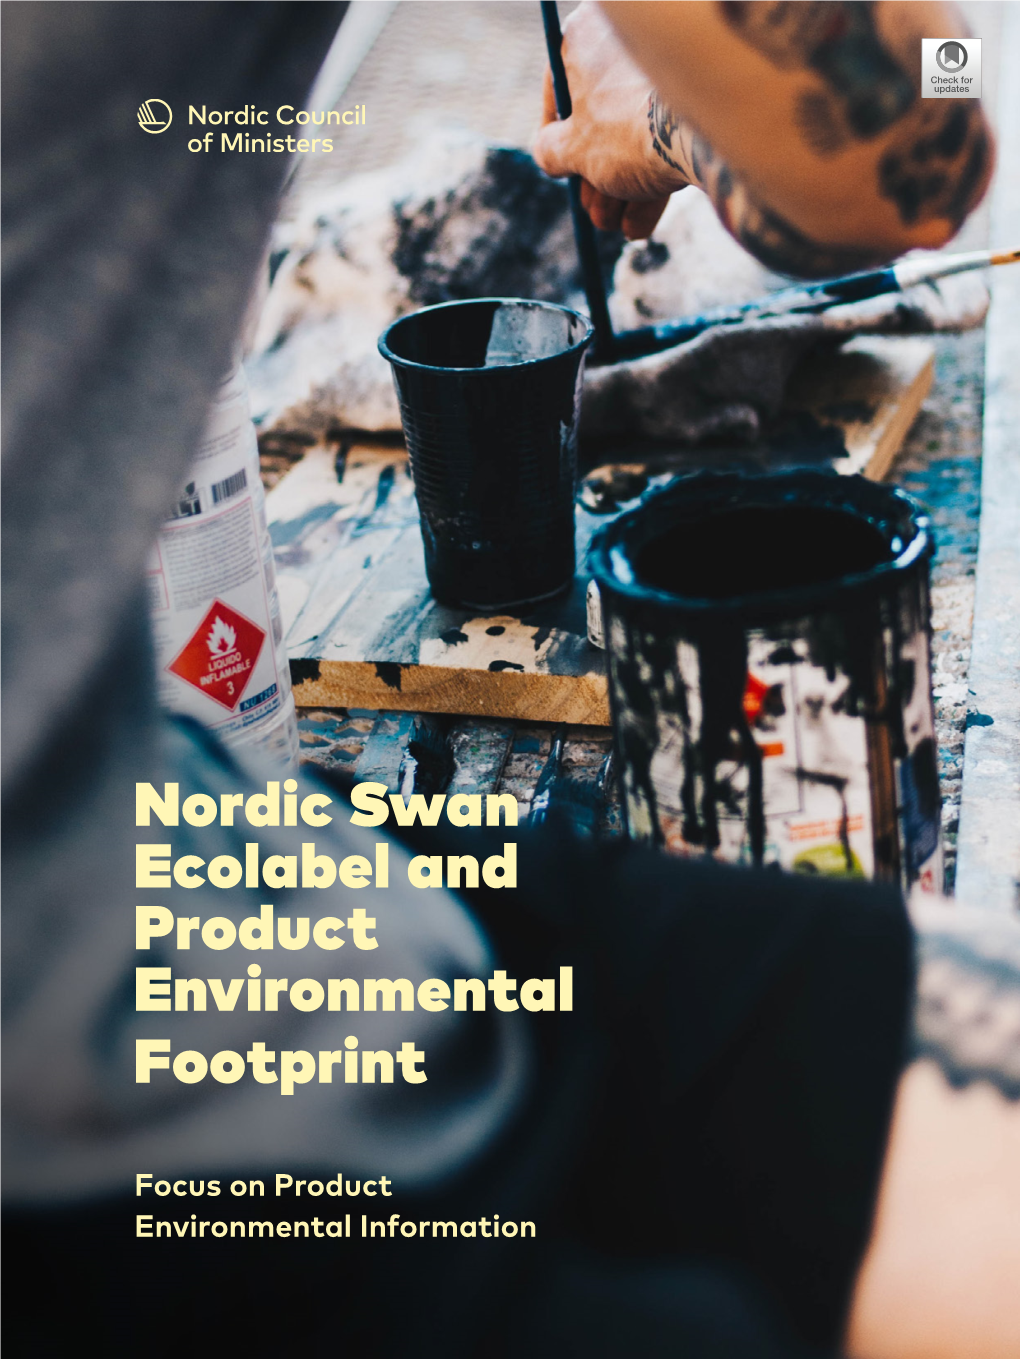 Nordic Swan Ecolabel and Product Environmental Footprint